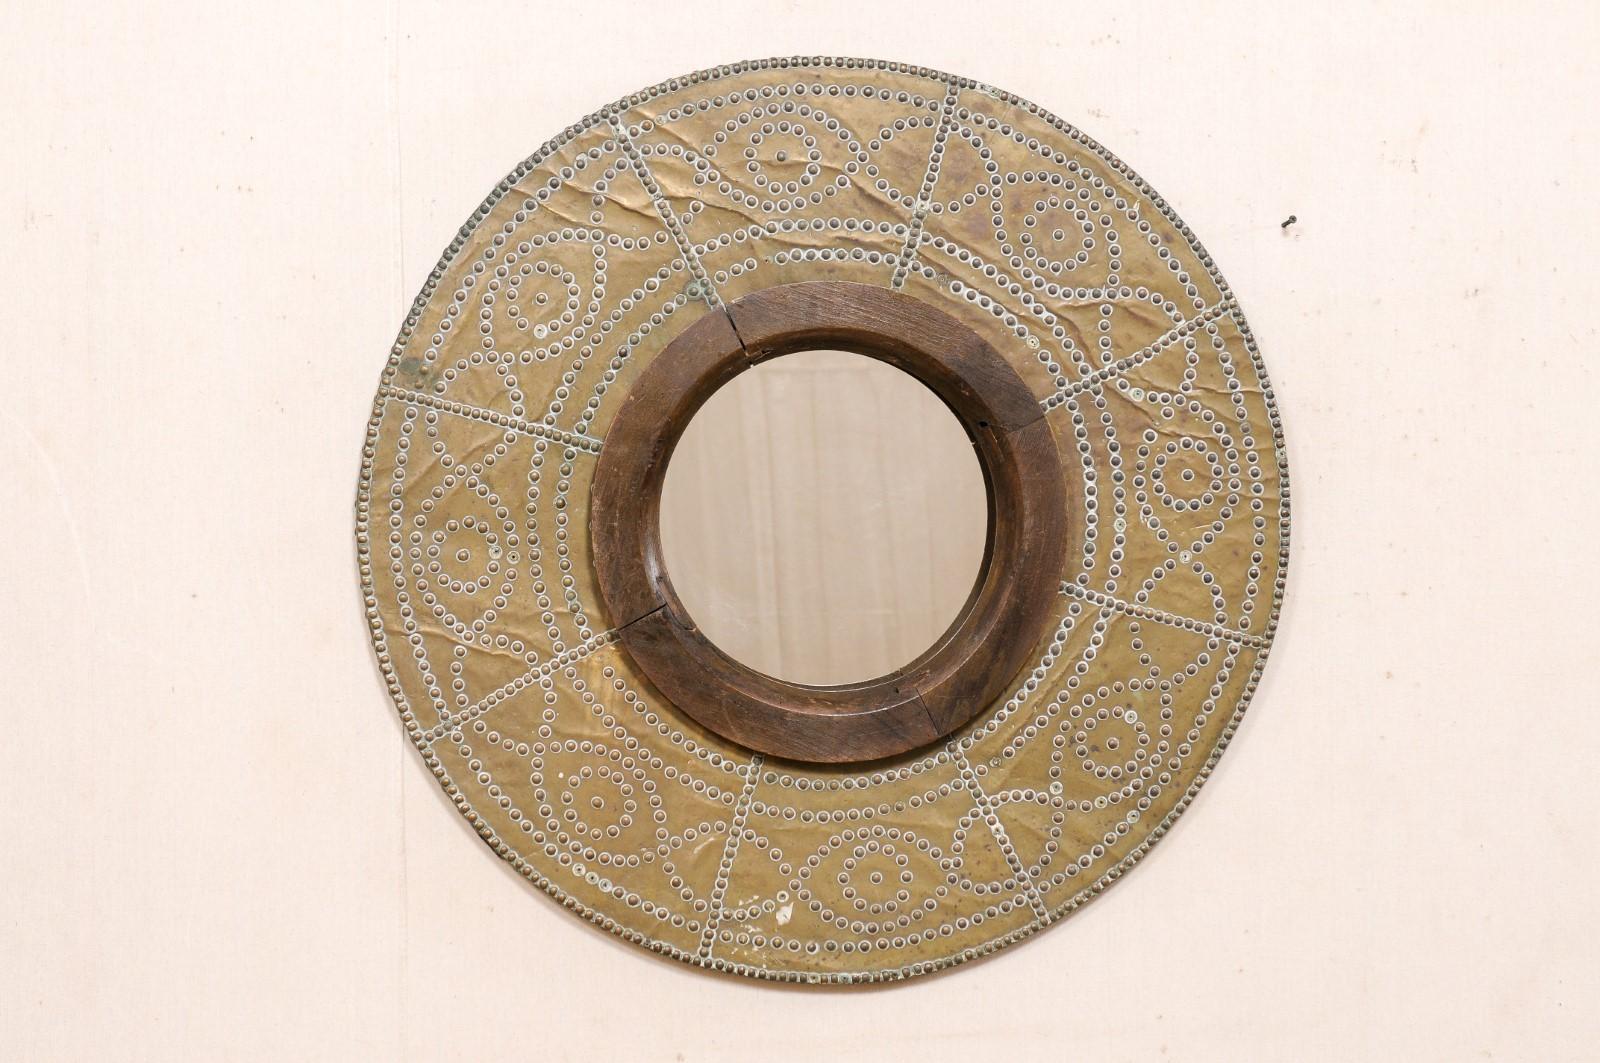 This beautiful round mirror has been custom fashioned from a Spanish 19th century copper brazier. This Spanish wall decoration features a round copper wrapped (over wood) 